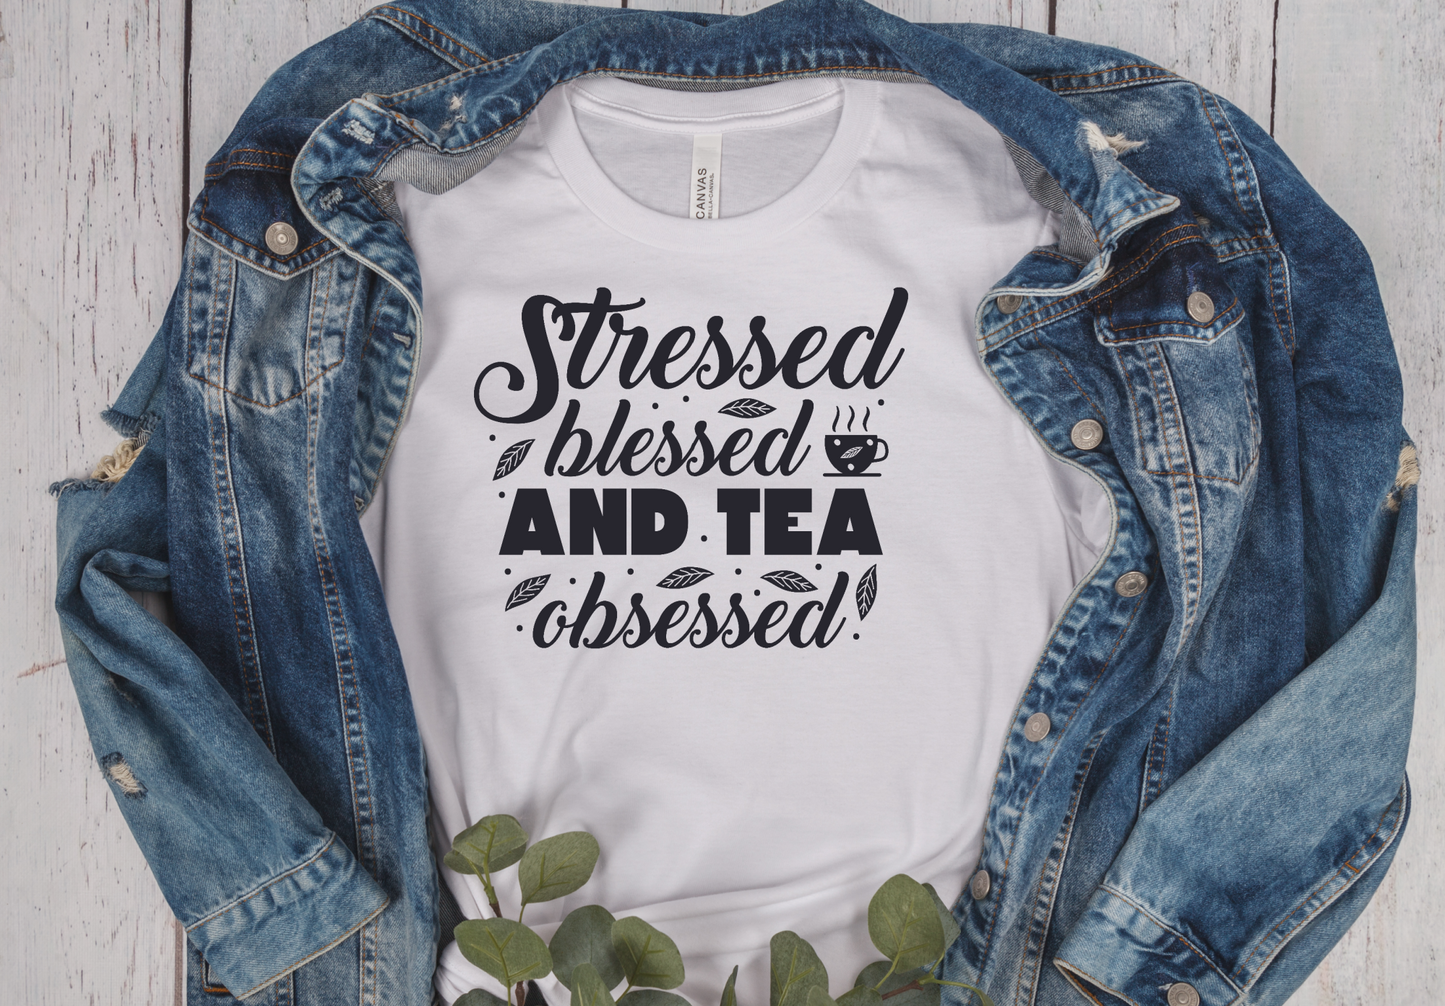 white short sleeve unisex T-Shirt with the saying Stressed Blessed and tea obsessed in black writting